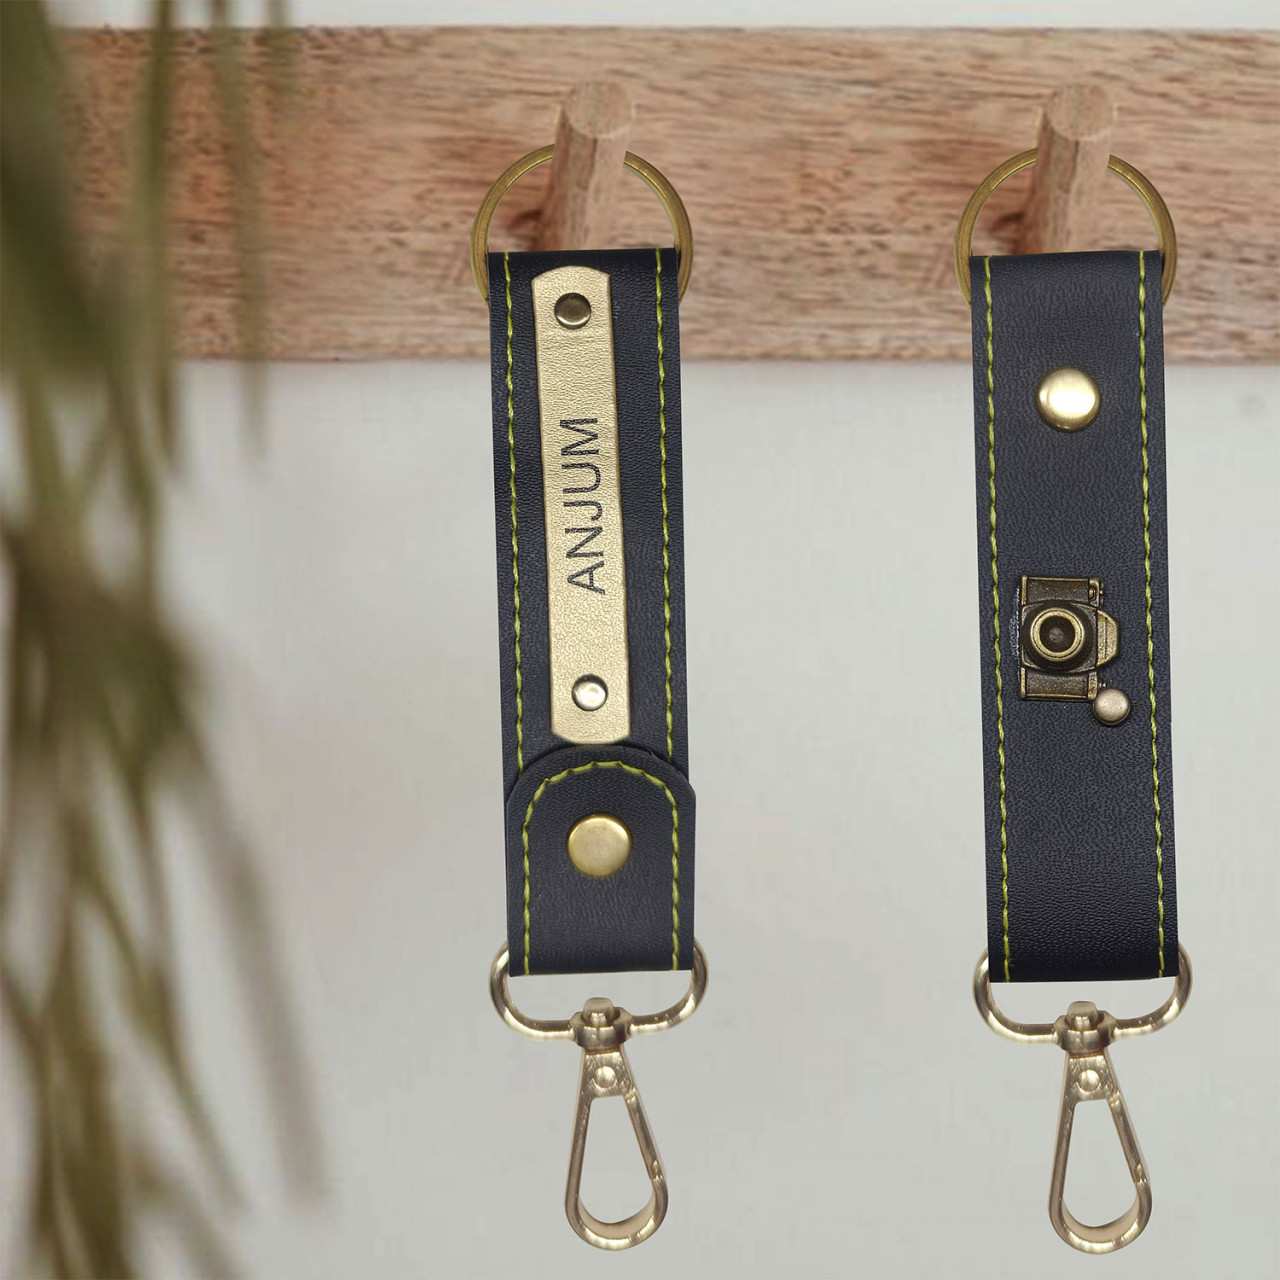 Personalized Leather Keychain With Name & Charm